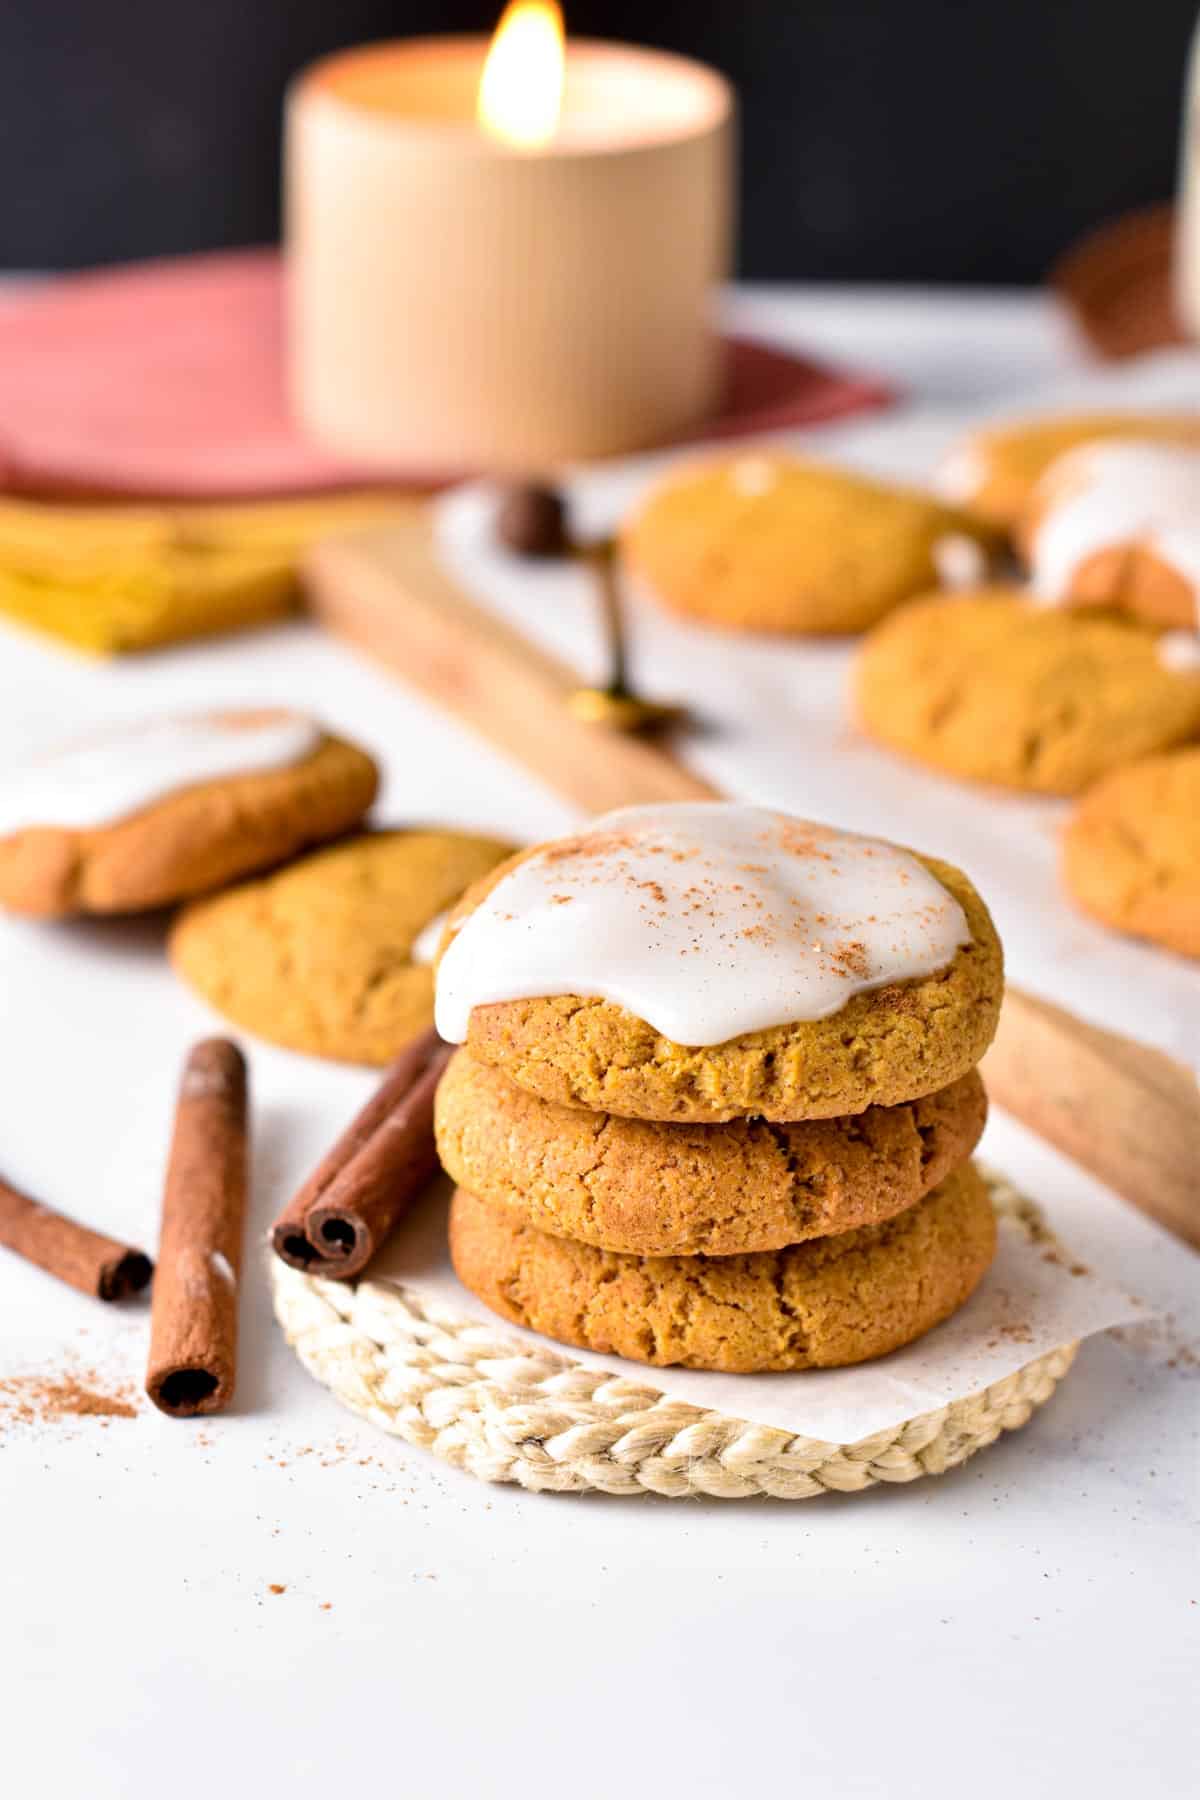 Vegan Pumpkin Cookies decorated with icing, in front of a candle and next to cinnamon sticks.